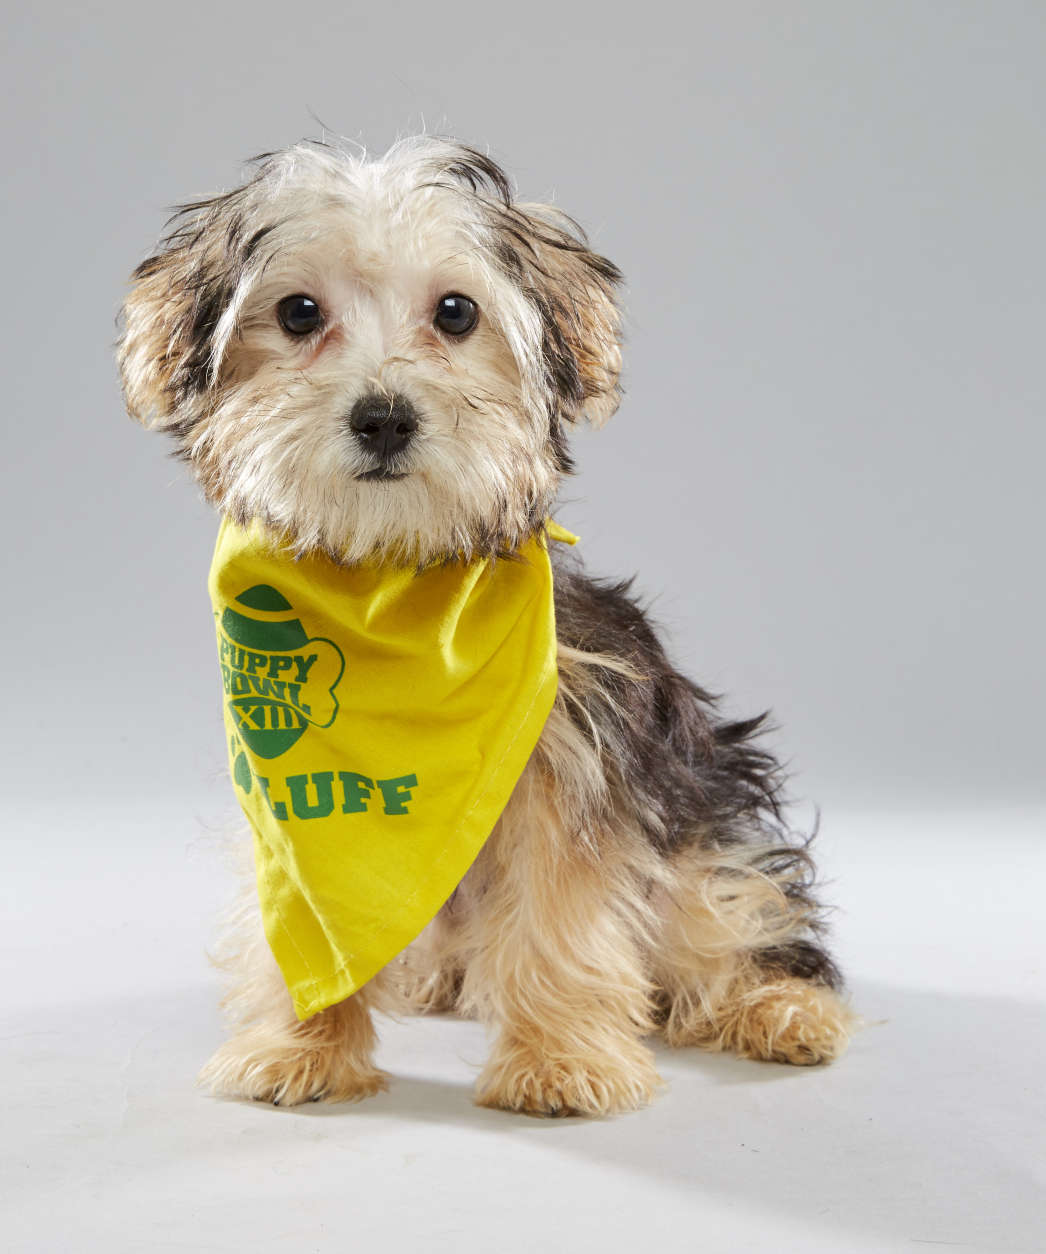 Parfait is from Florida Little Dog Rescue and on "Team Fluff." (Courtesy Animal Planet/Keith Barraclough)